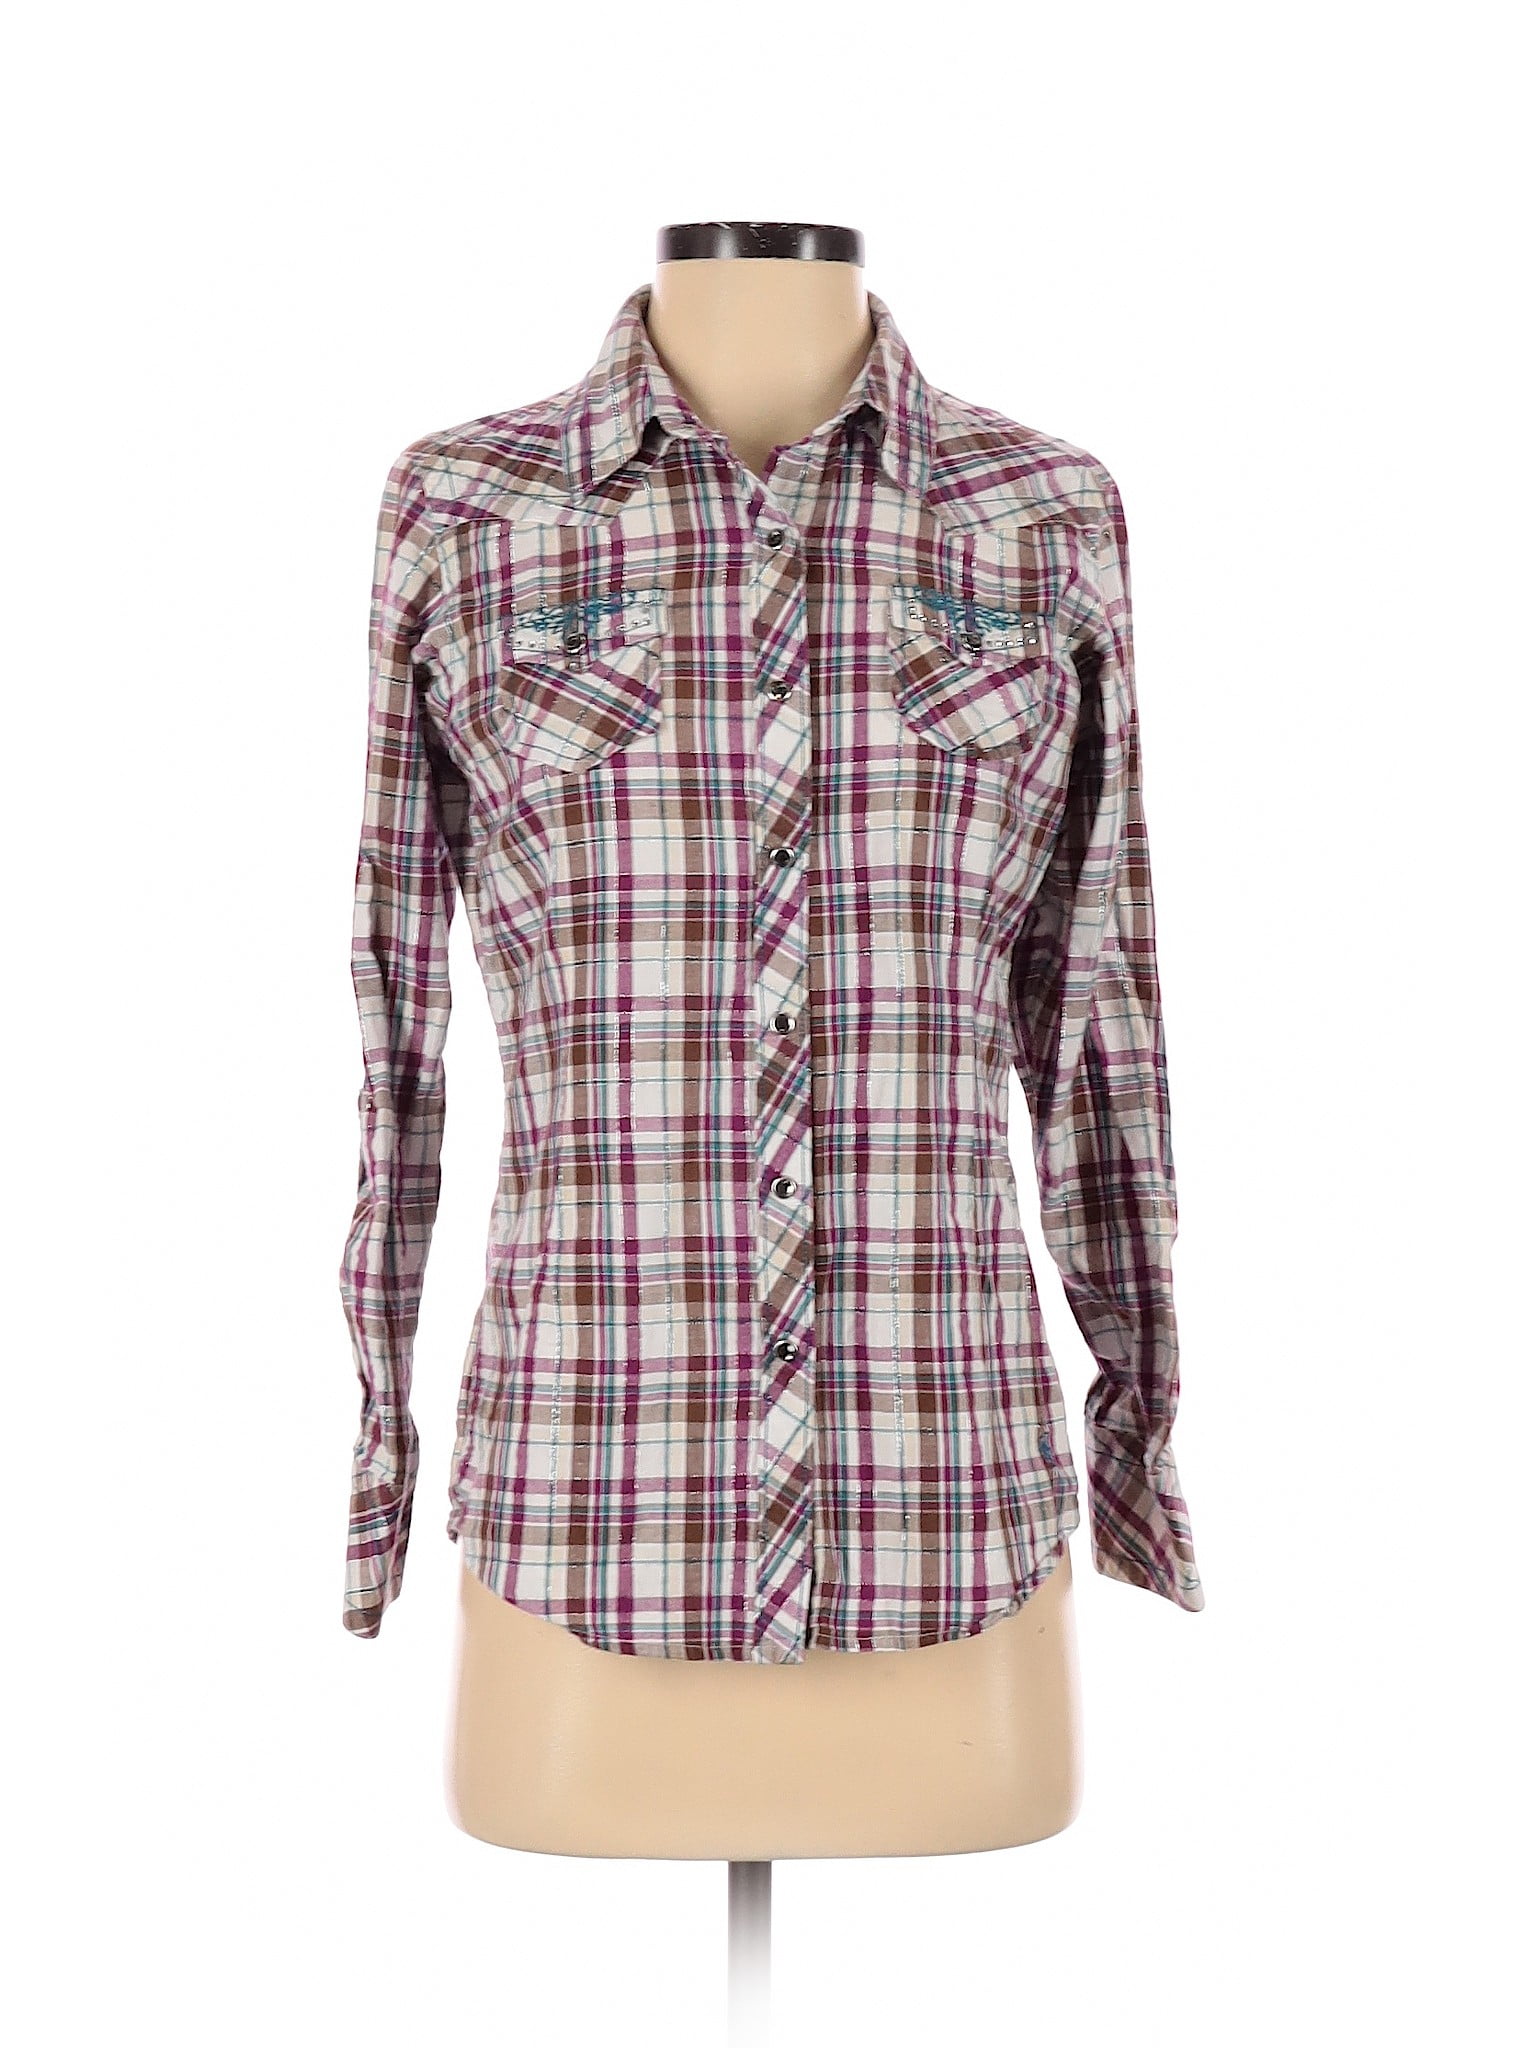 Ariat - Pre-Owned Ariat Women's Size S Long Sleeve Button-Down Shirt ...